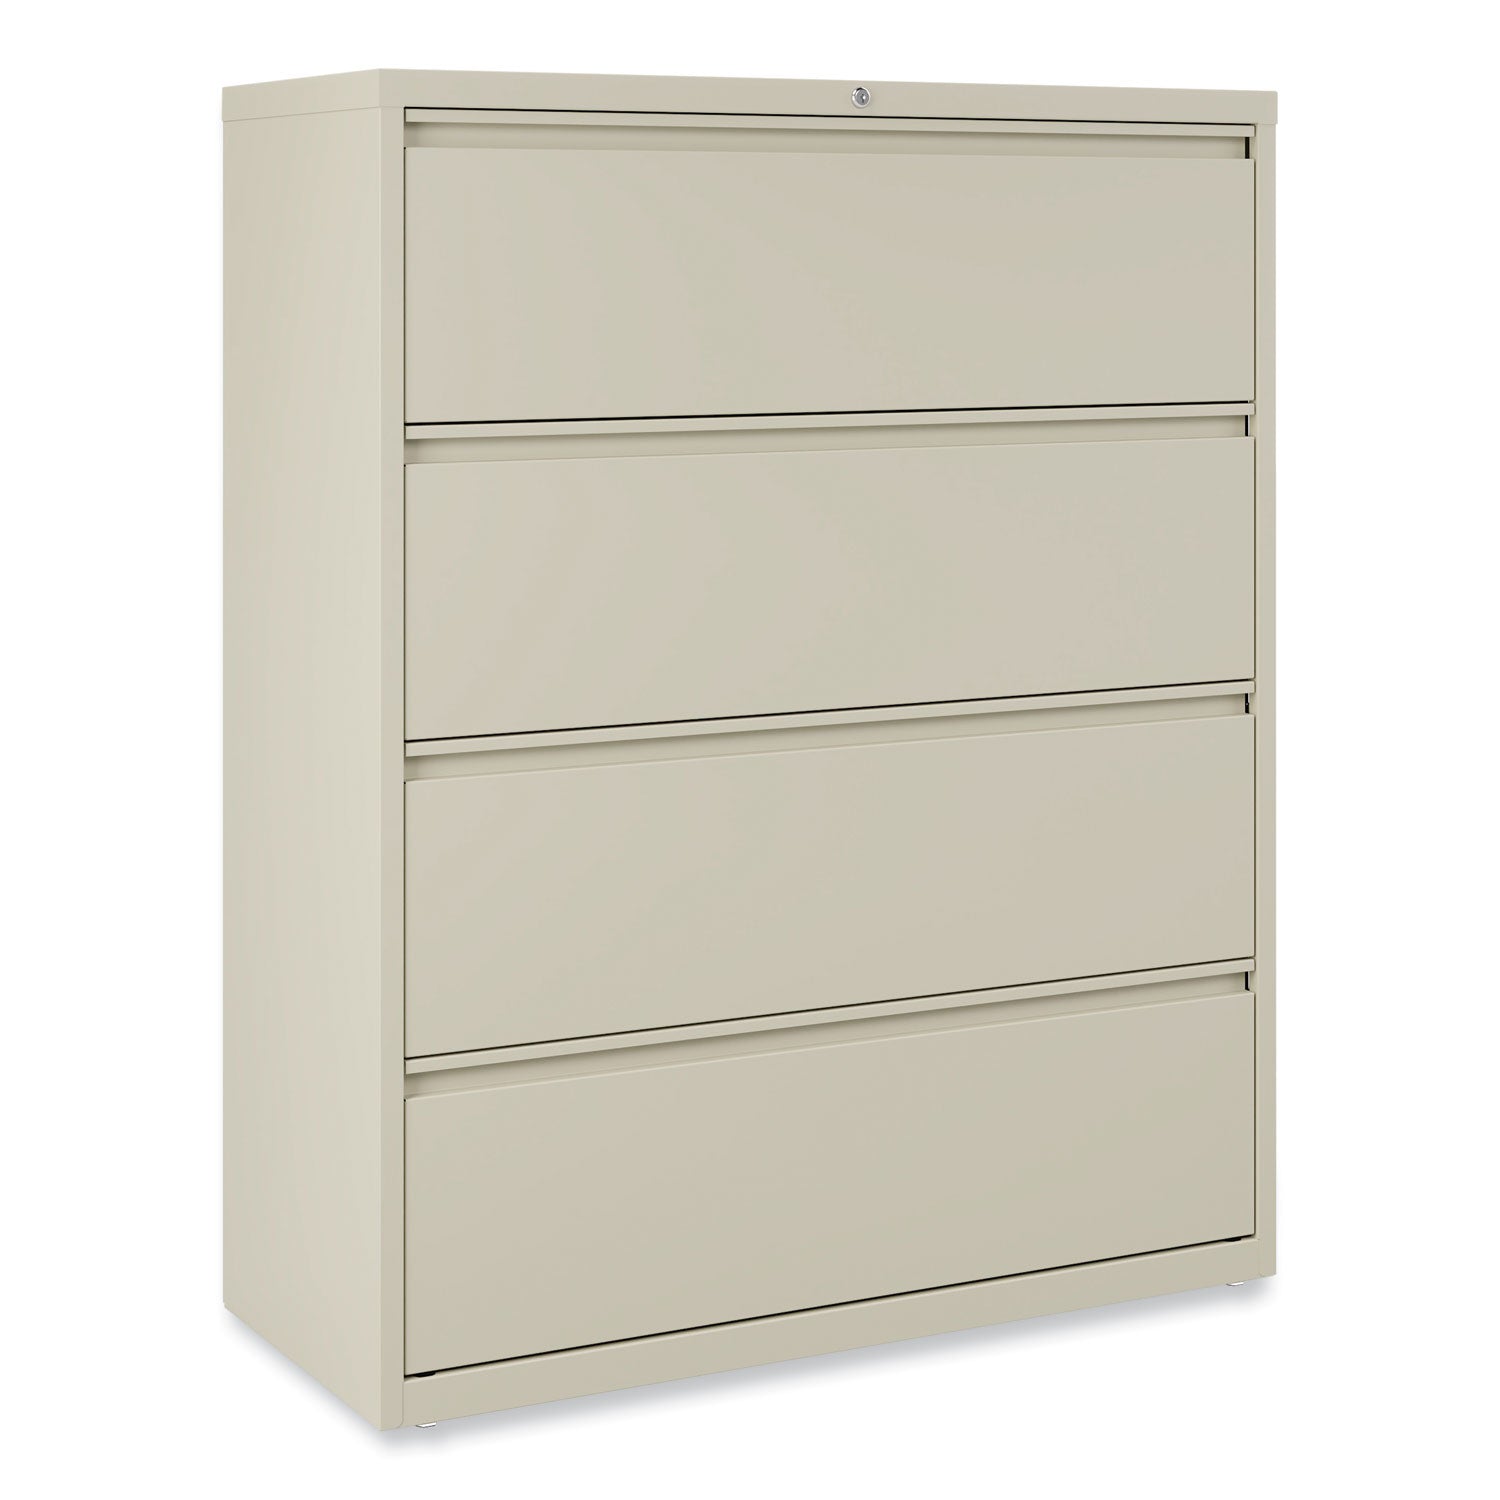 lateral-file-4-legal-letter-size-file-drawers-putty-42-x-1863-x-525_alehlf4254py - 1